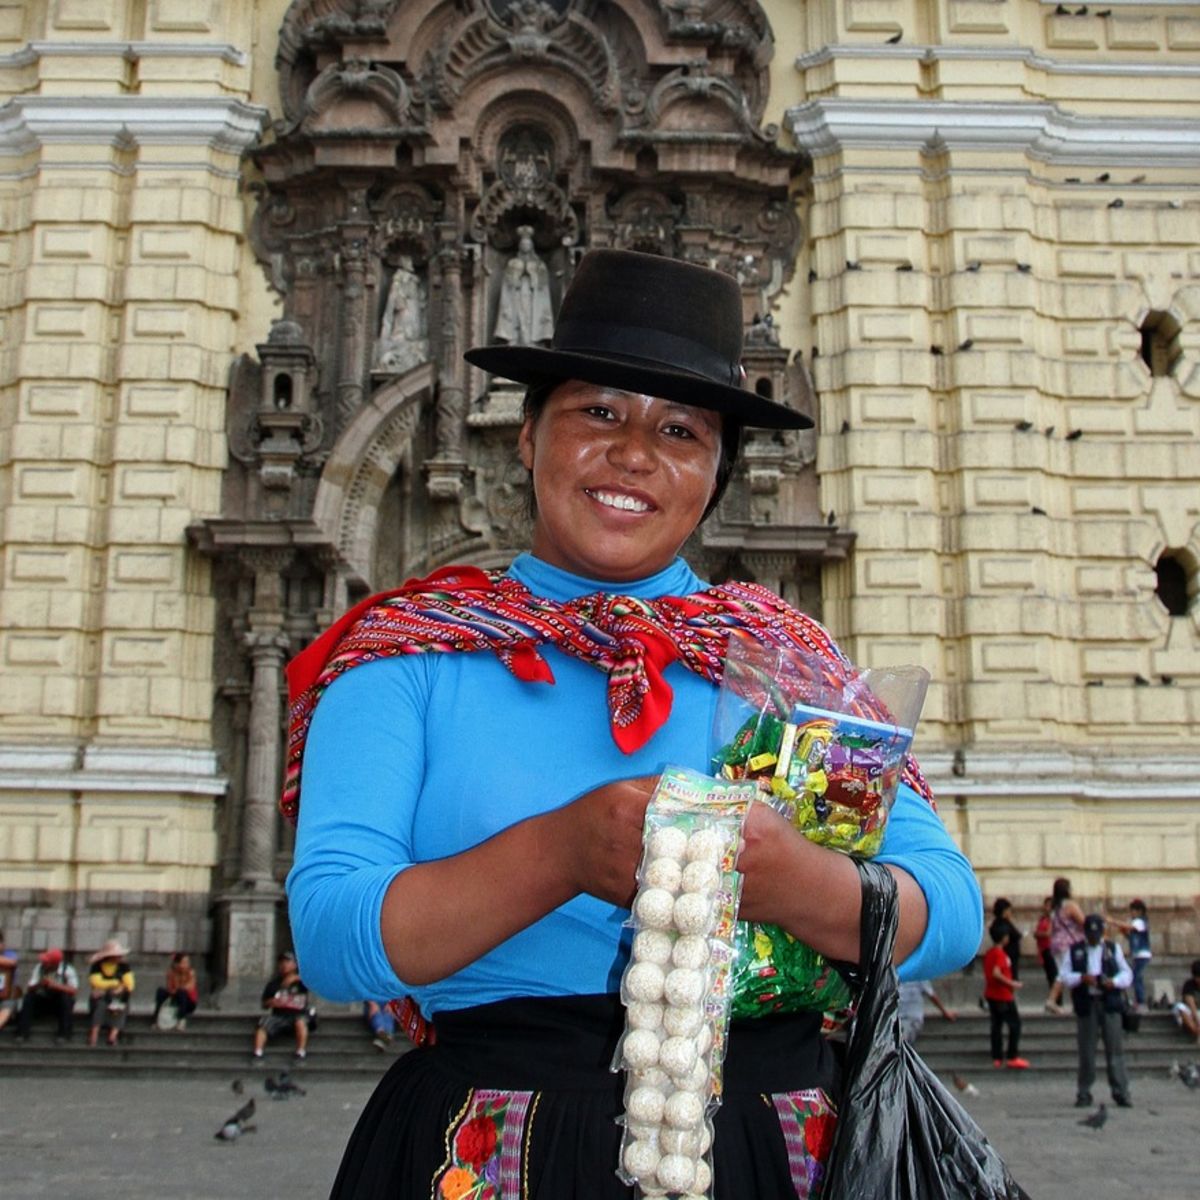 Smiling local woman selling sweets in Lima, Peru